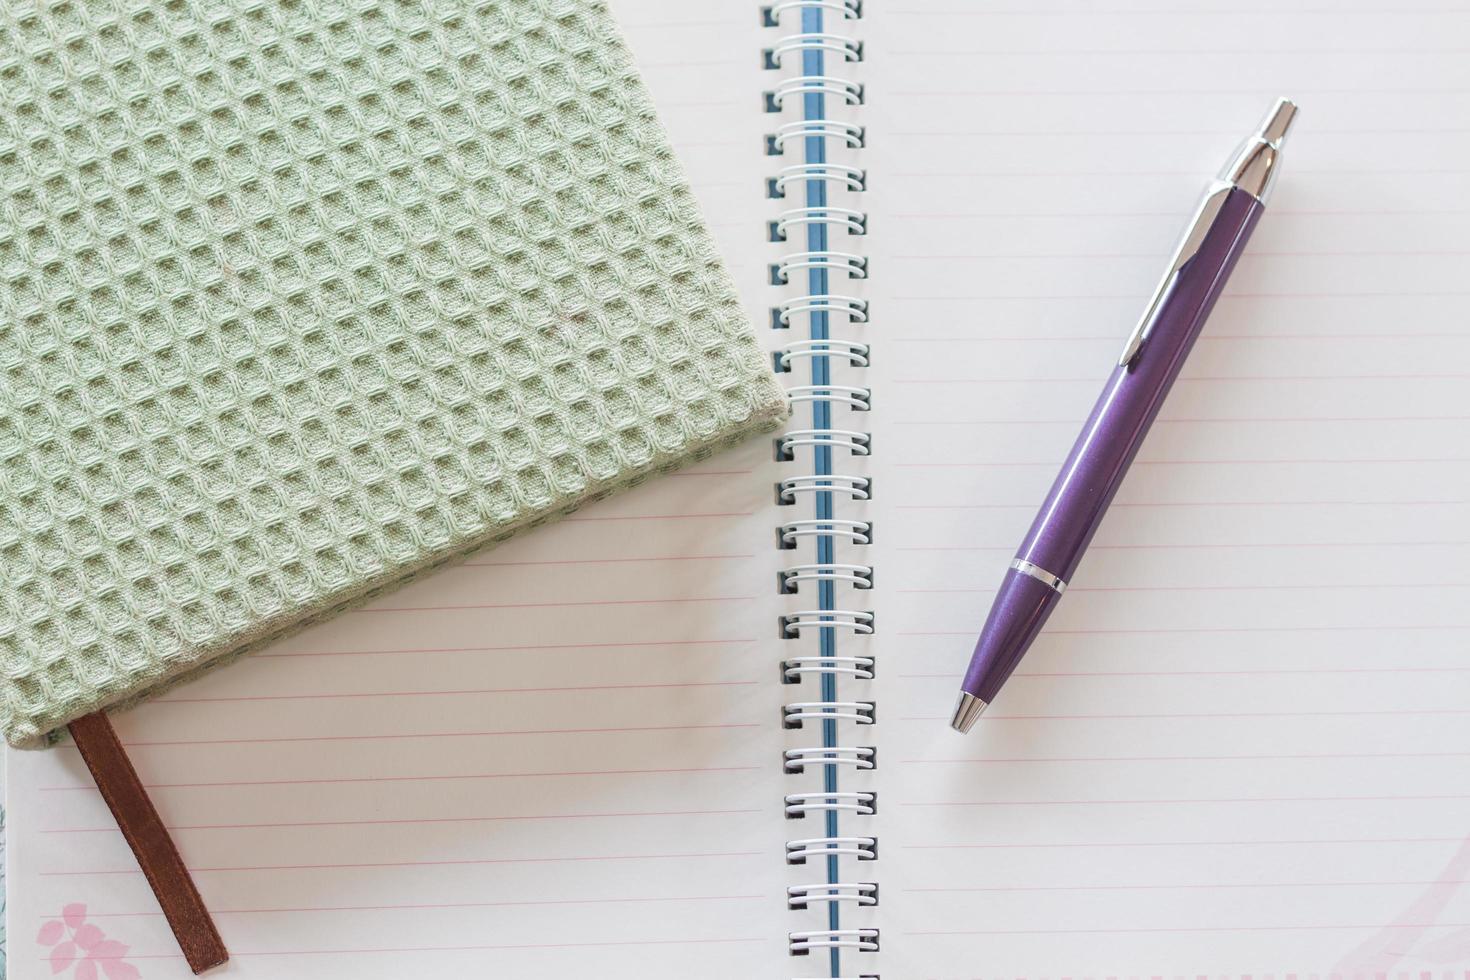 Top view of a green notebook, pen and a spiral notebook photo